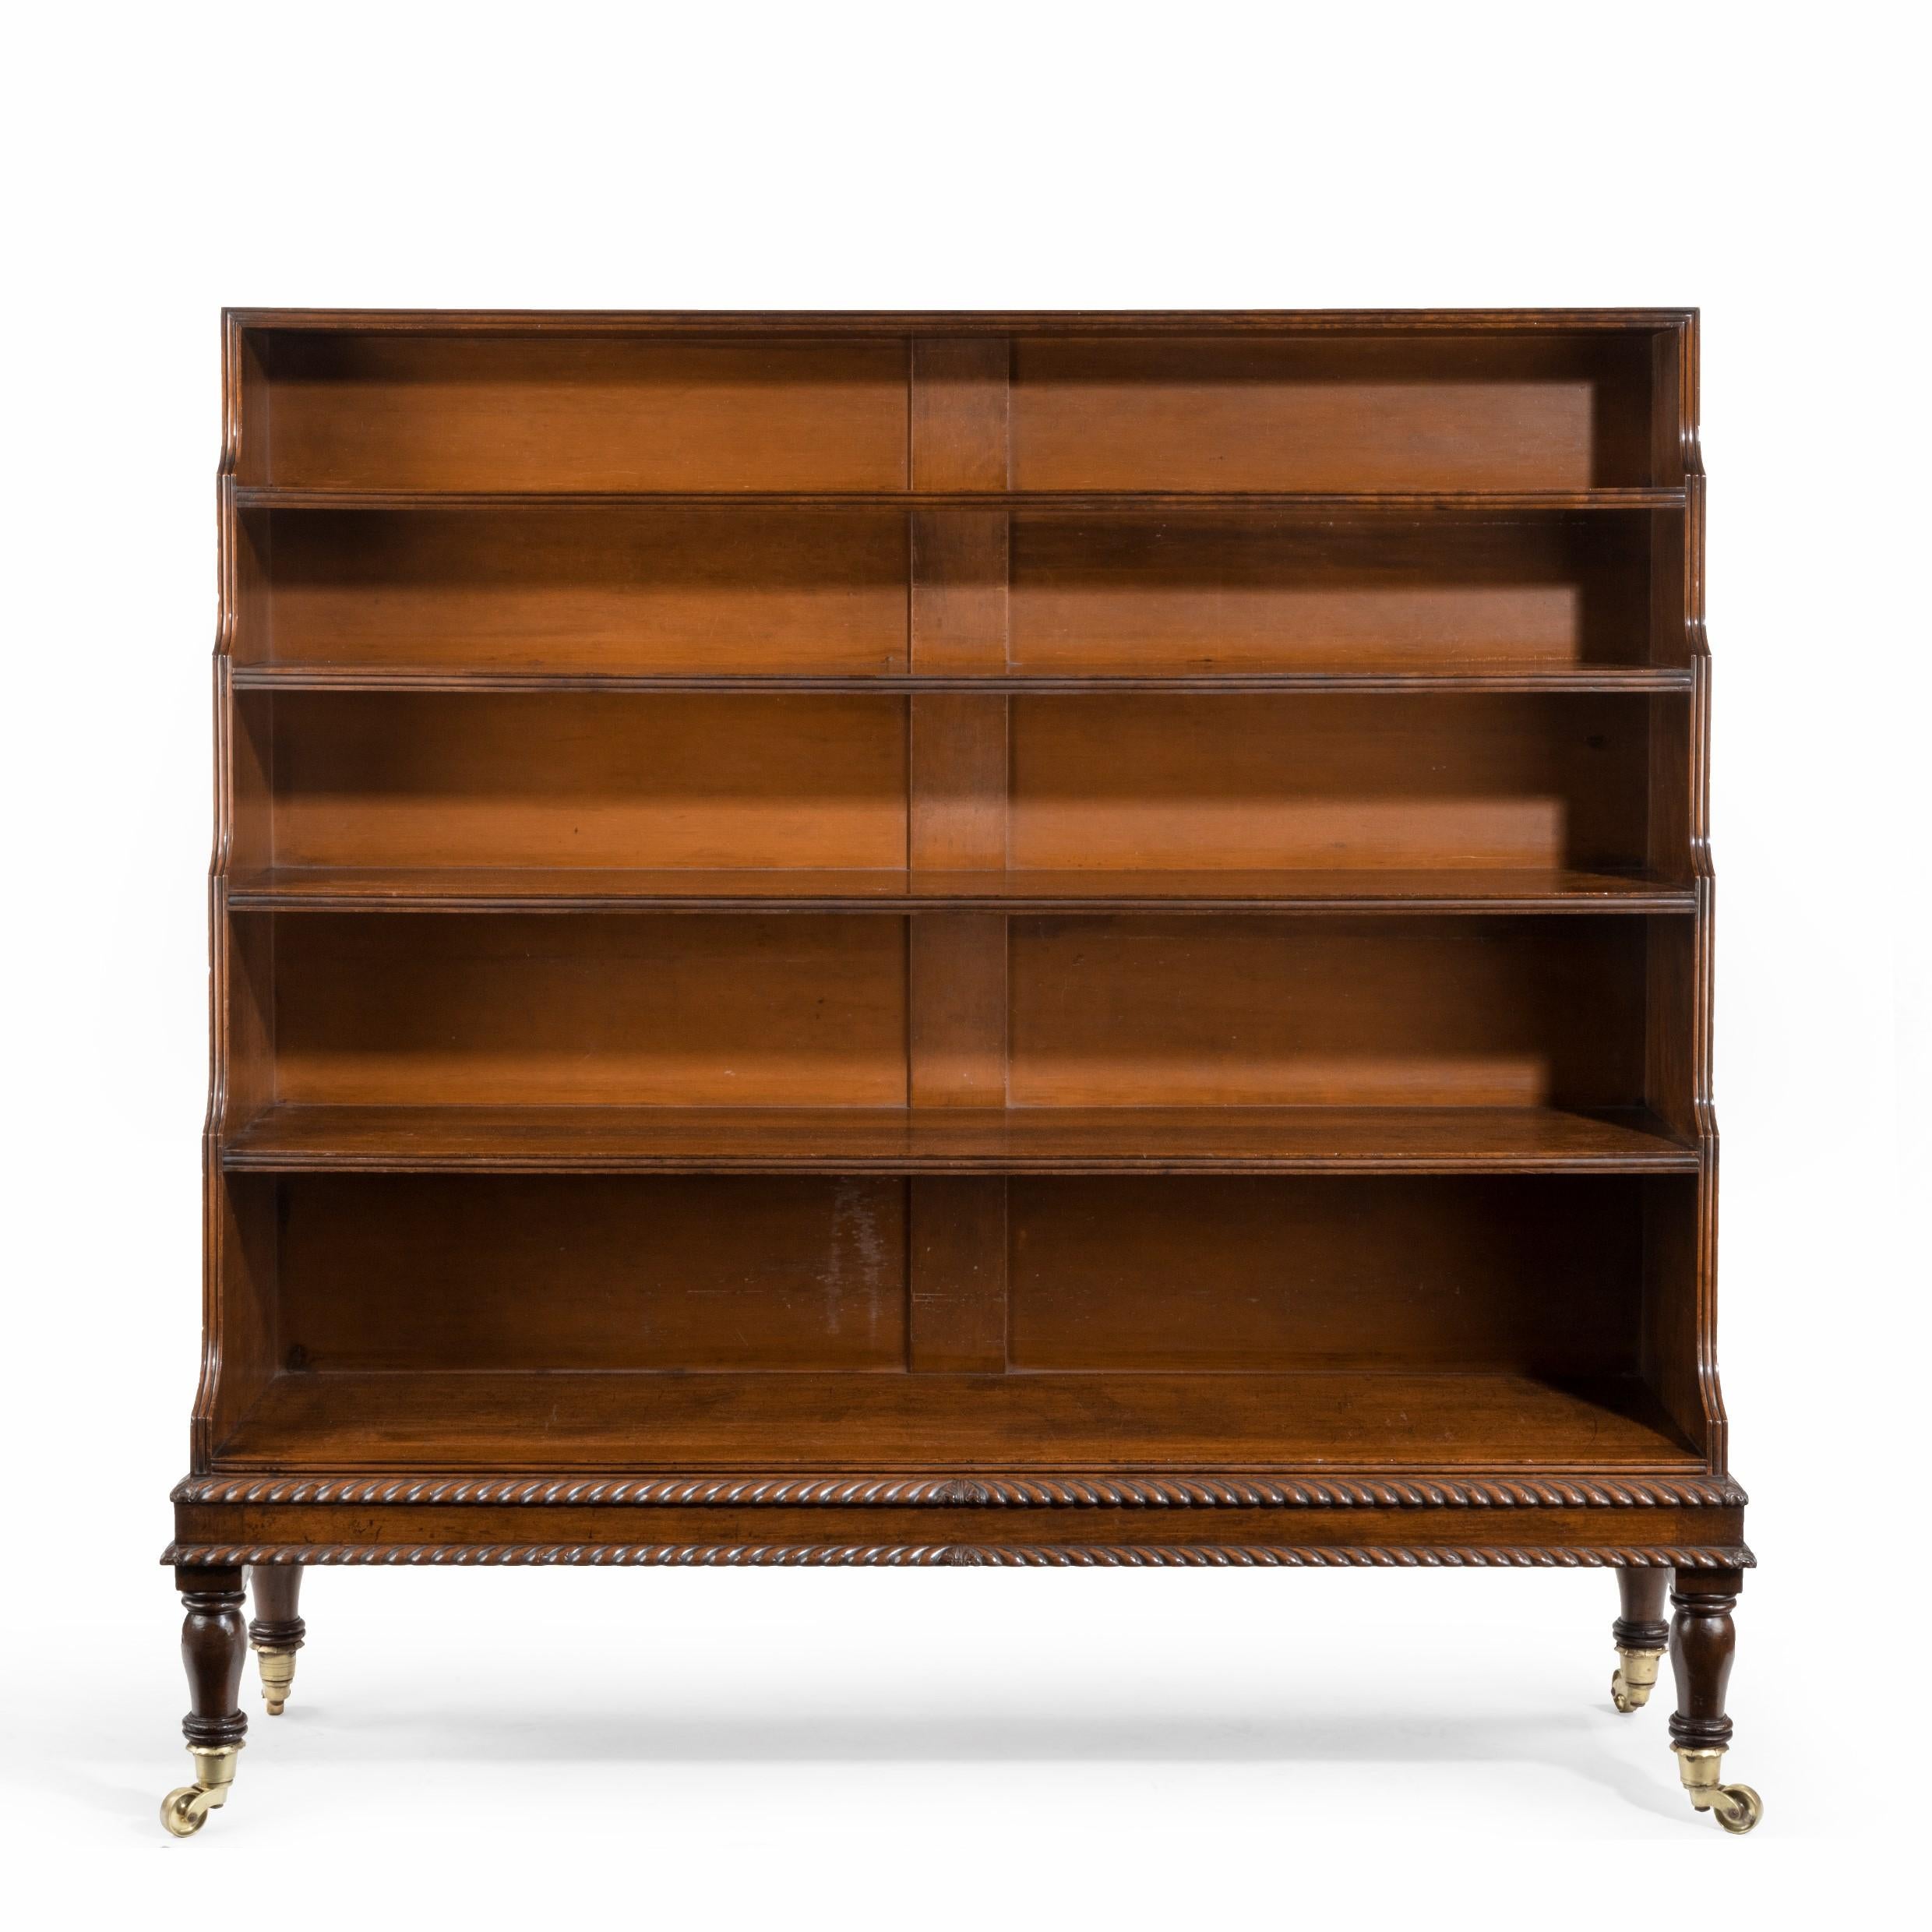 A large Regency mahogany waterfall open bookcase, of upright rectangular form with five graduated shelves raised on turned baluster legs with brass handles and castors, decorated with reeding and two bands of gadrooning. English, circa 1820.
 